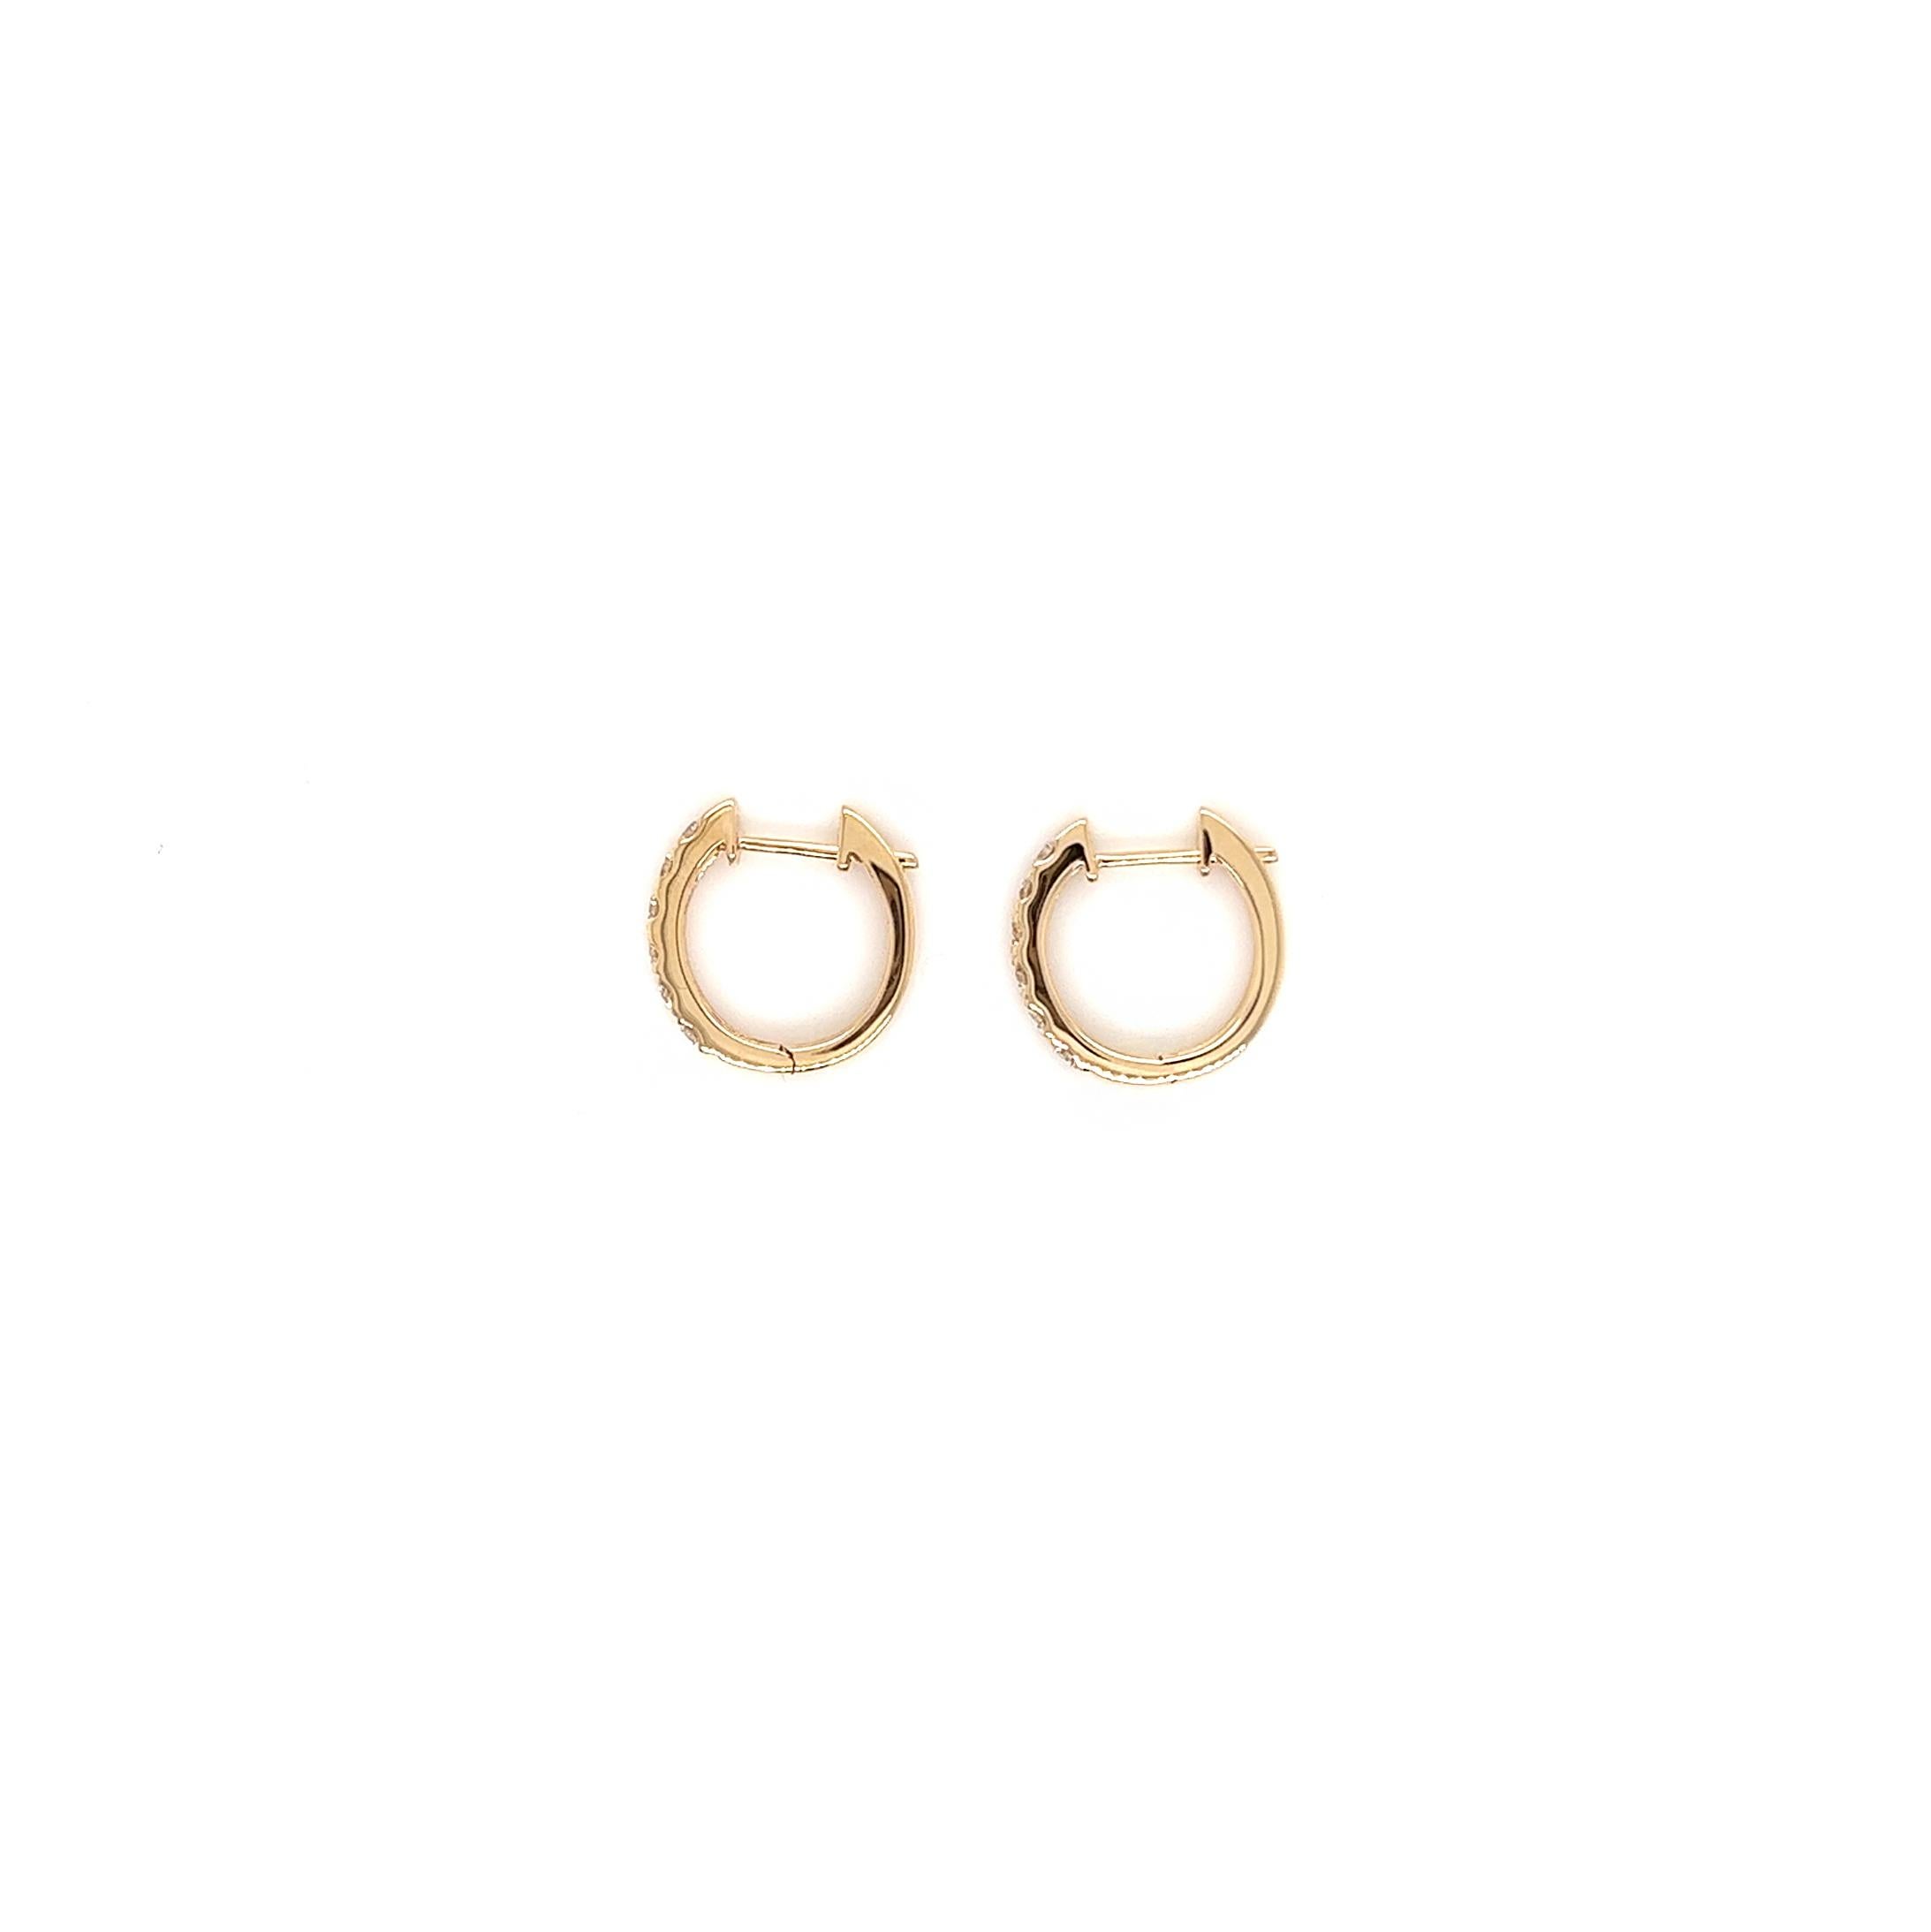 0.42 Carat Diamond Pave-Set Hoop Earrings in 14K Yellow Gold In New Condition For Sale In New York, NY